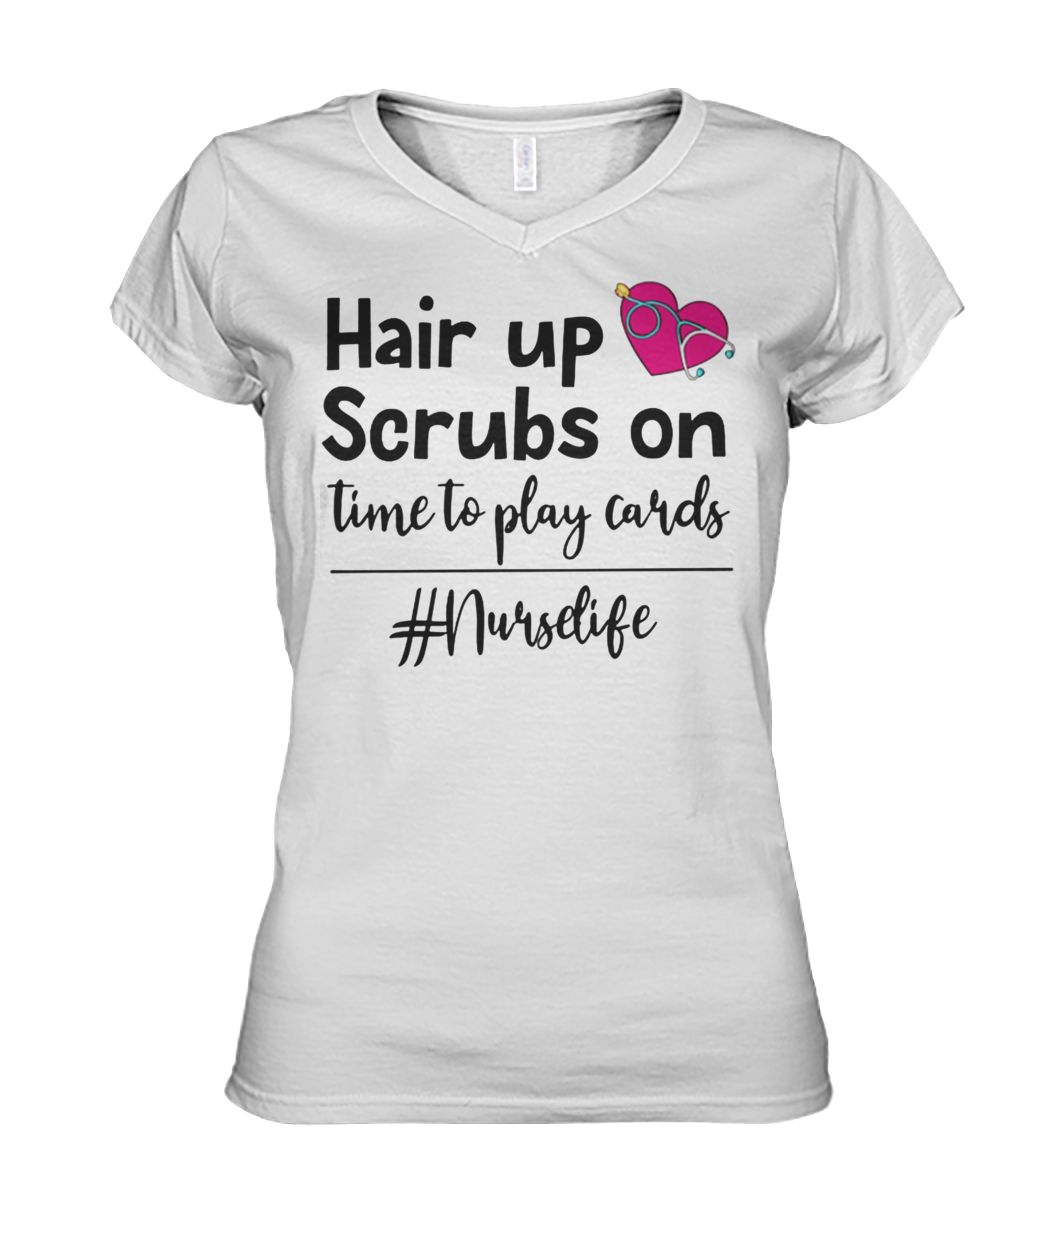 Nurse life hair up scrubs on time to play cards women's v-neck